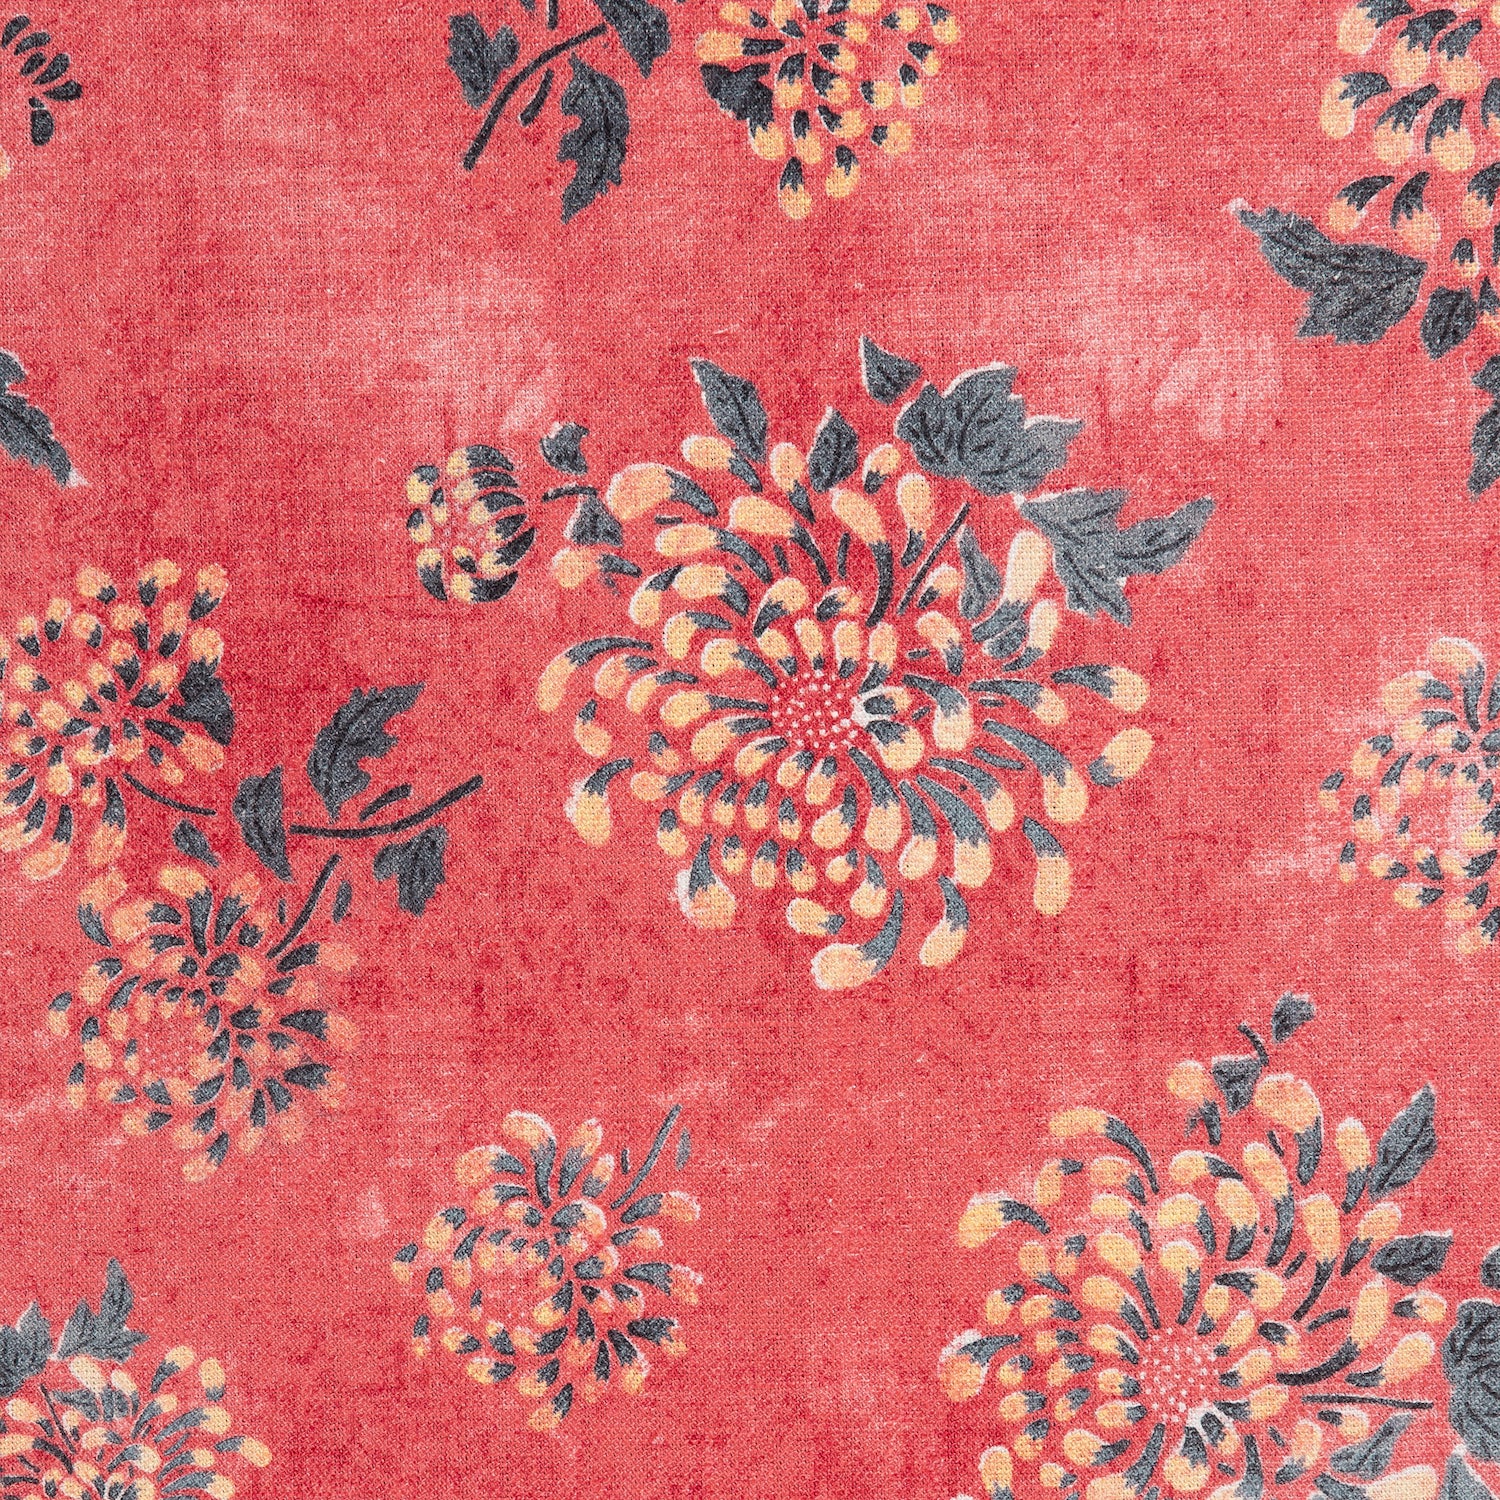 Detail of a printed linen fabric in a repeating floral pattern in shades of yellow and green on a red field.